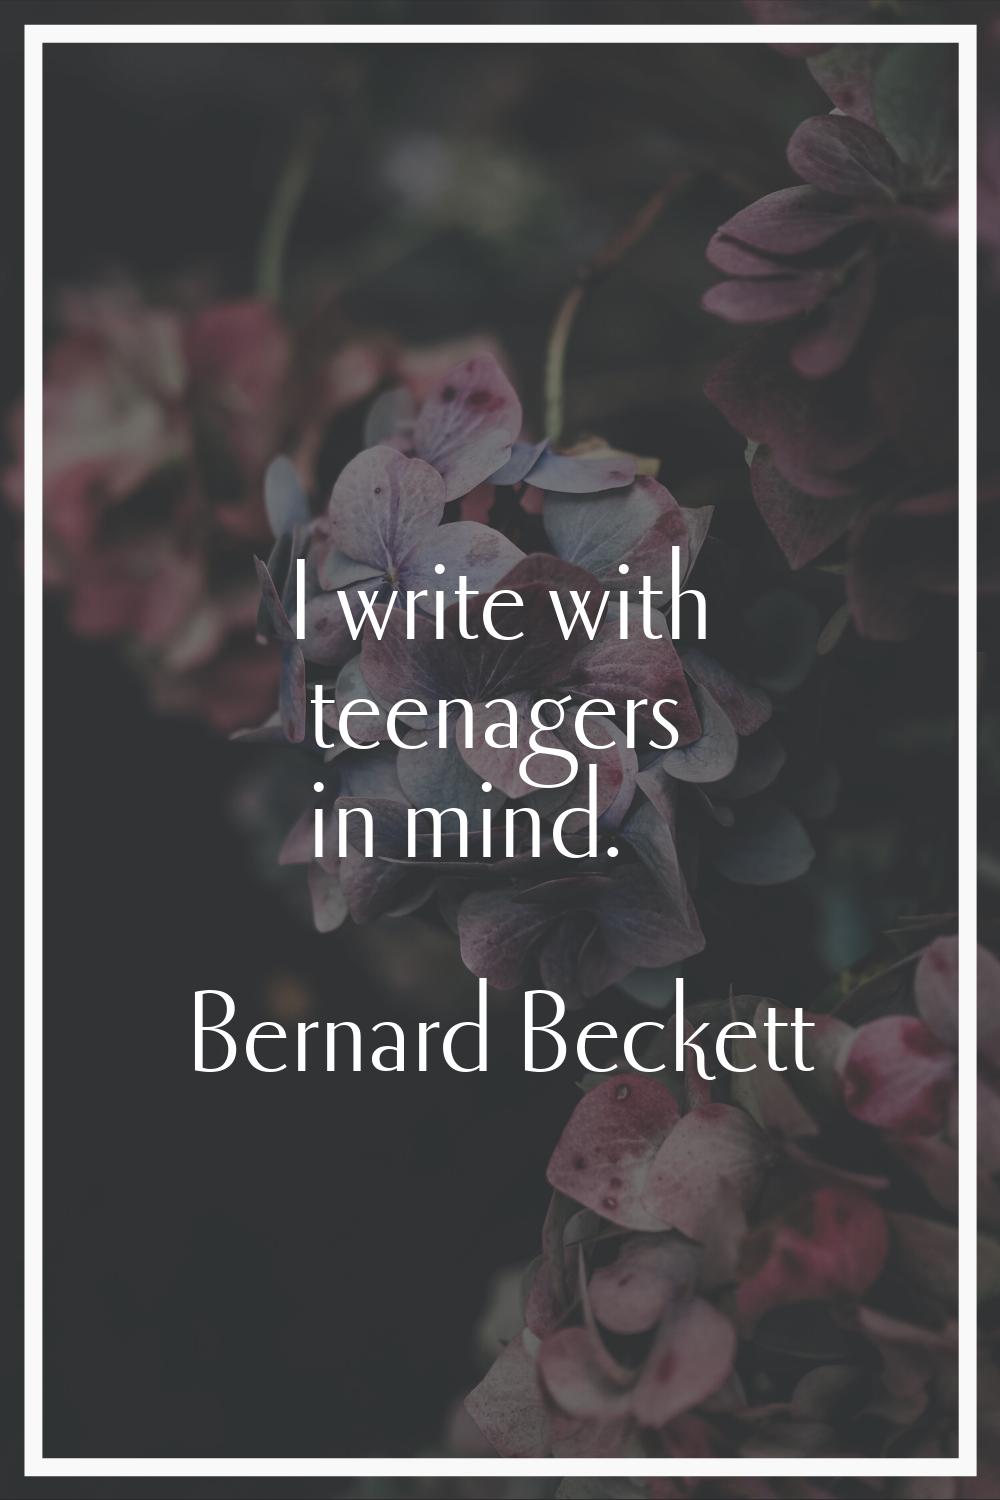 I write with teenagers in mind.